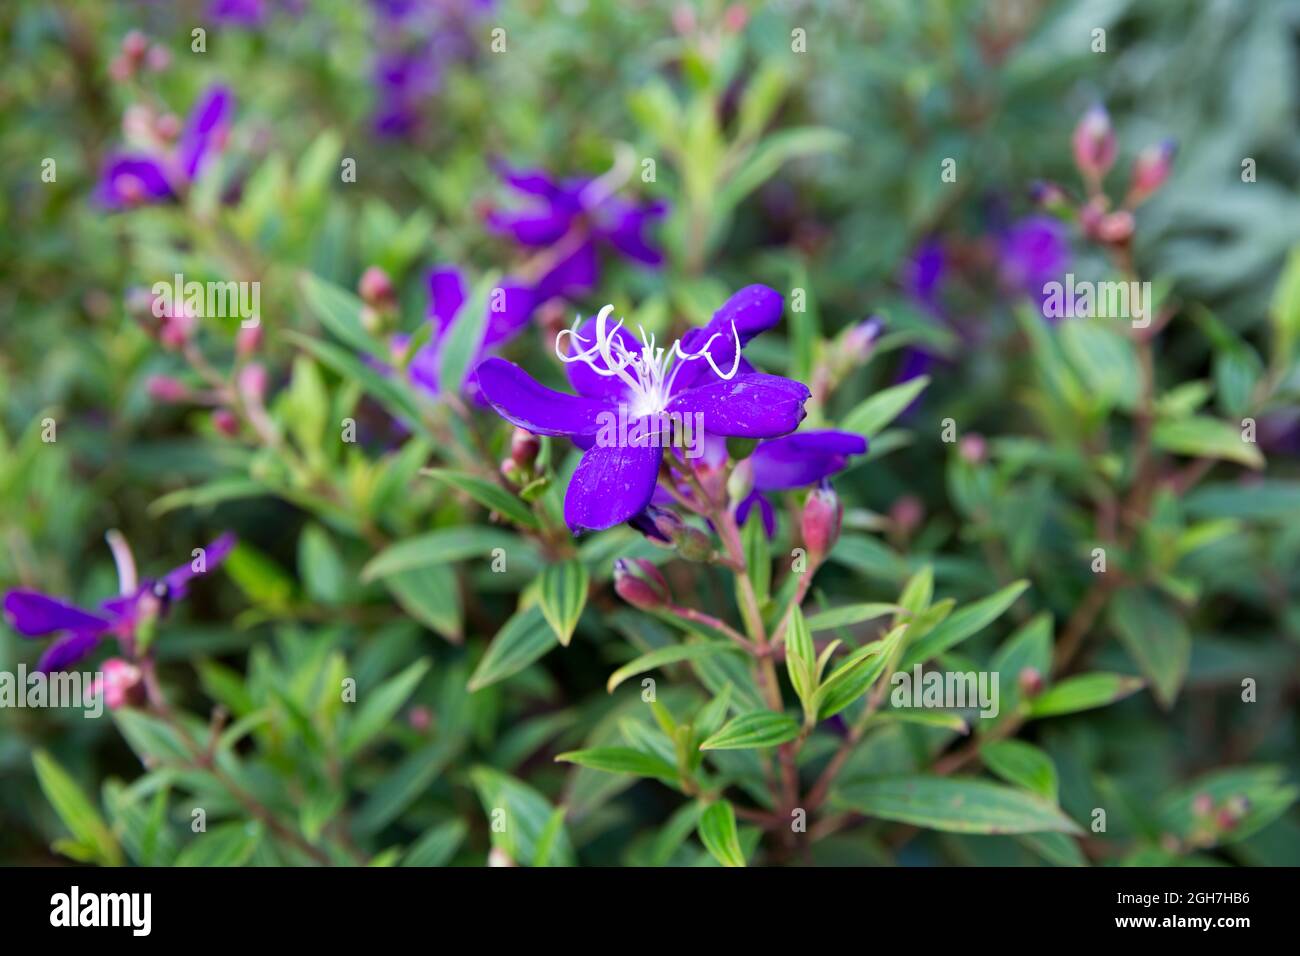 Glory bush, or lasiandra. This plant is native to Brazil and it produces colorful flowers, focus selective. Stock Photo